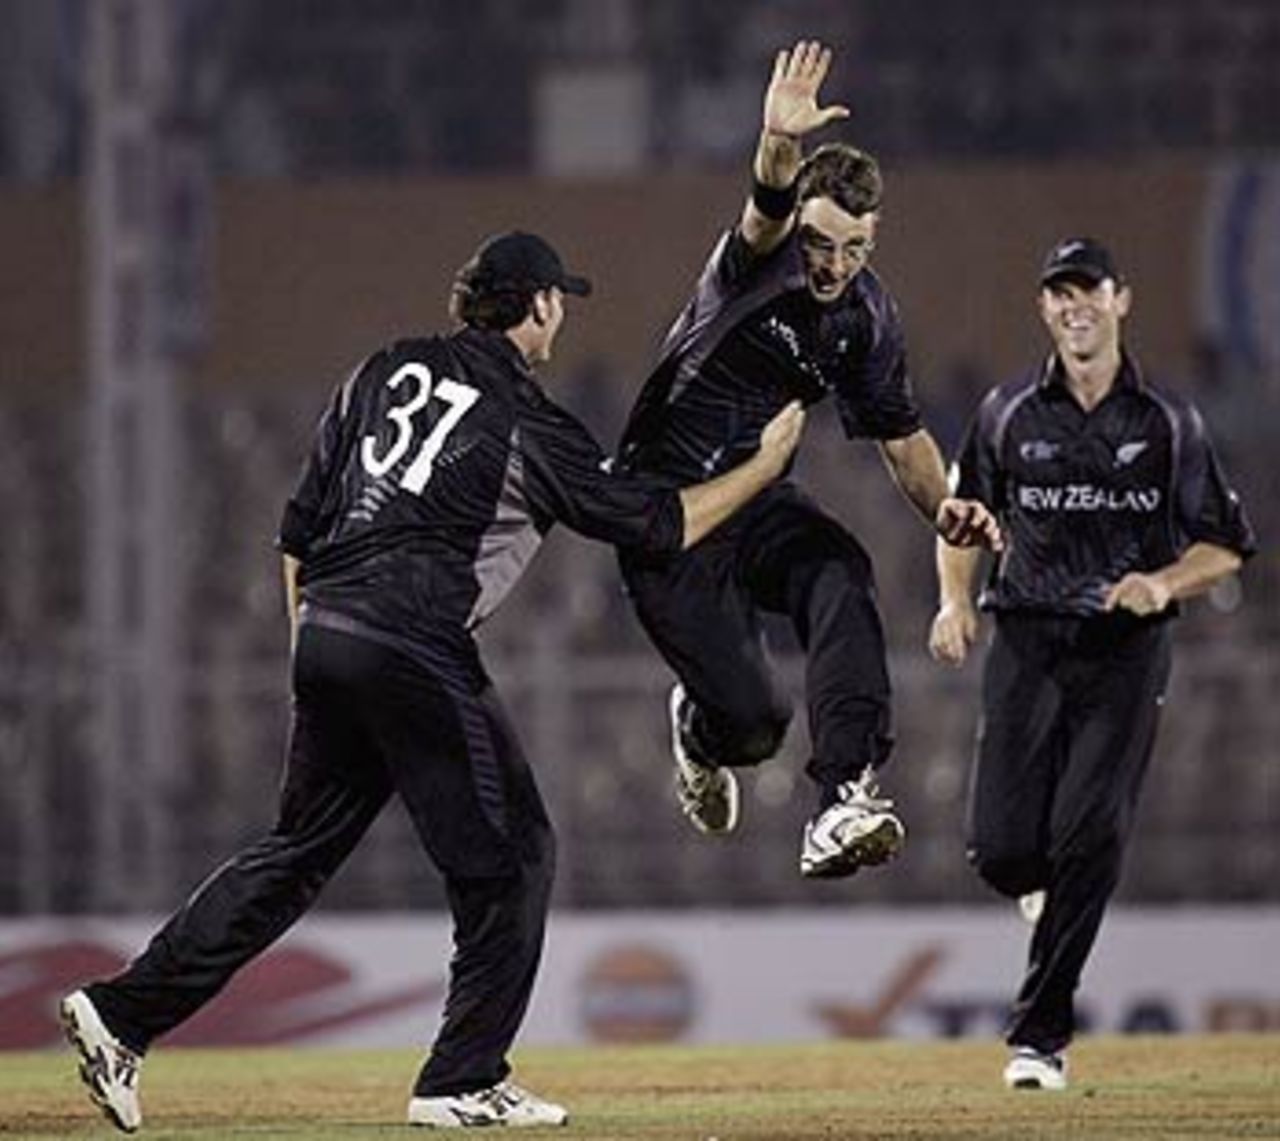 Daniel Vettori celebrates after nailing the eighth South African wicket, New Zealand v South Africa, 2nd Match, Champions Trophy, Mumbai, October 16, 2006